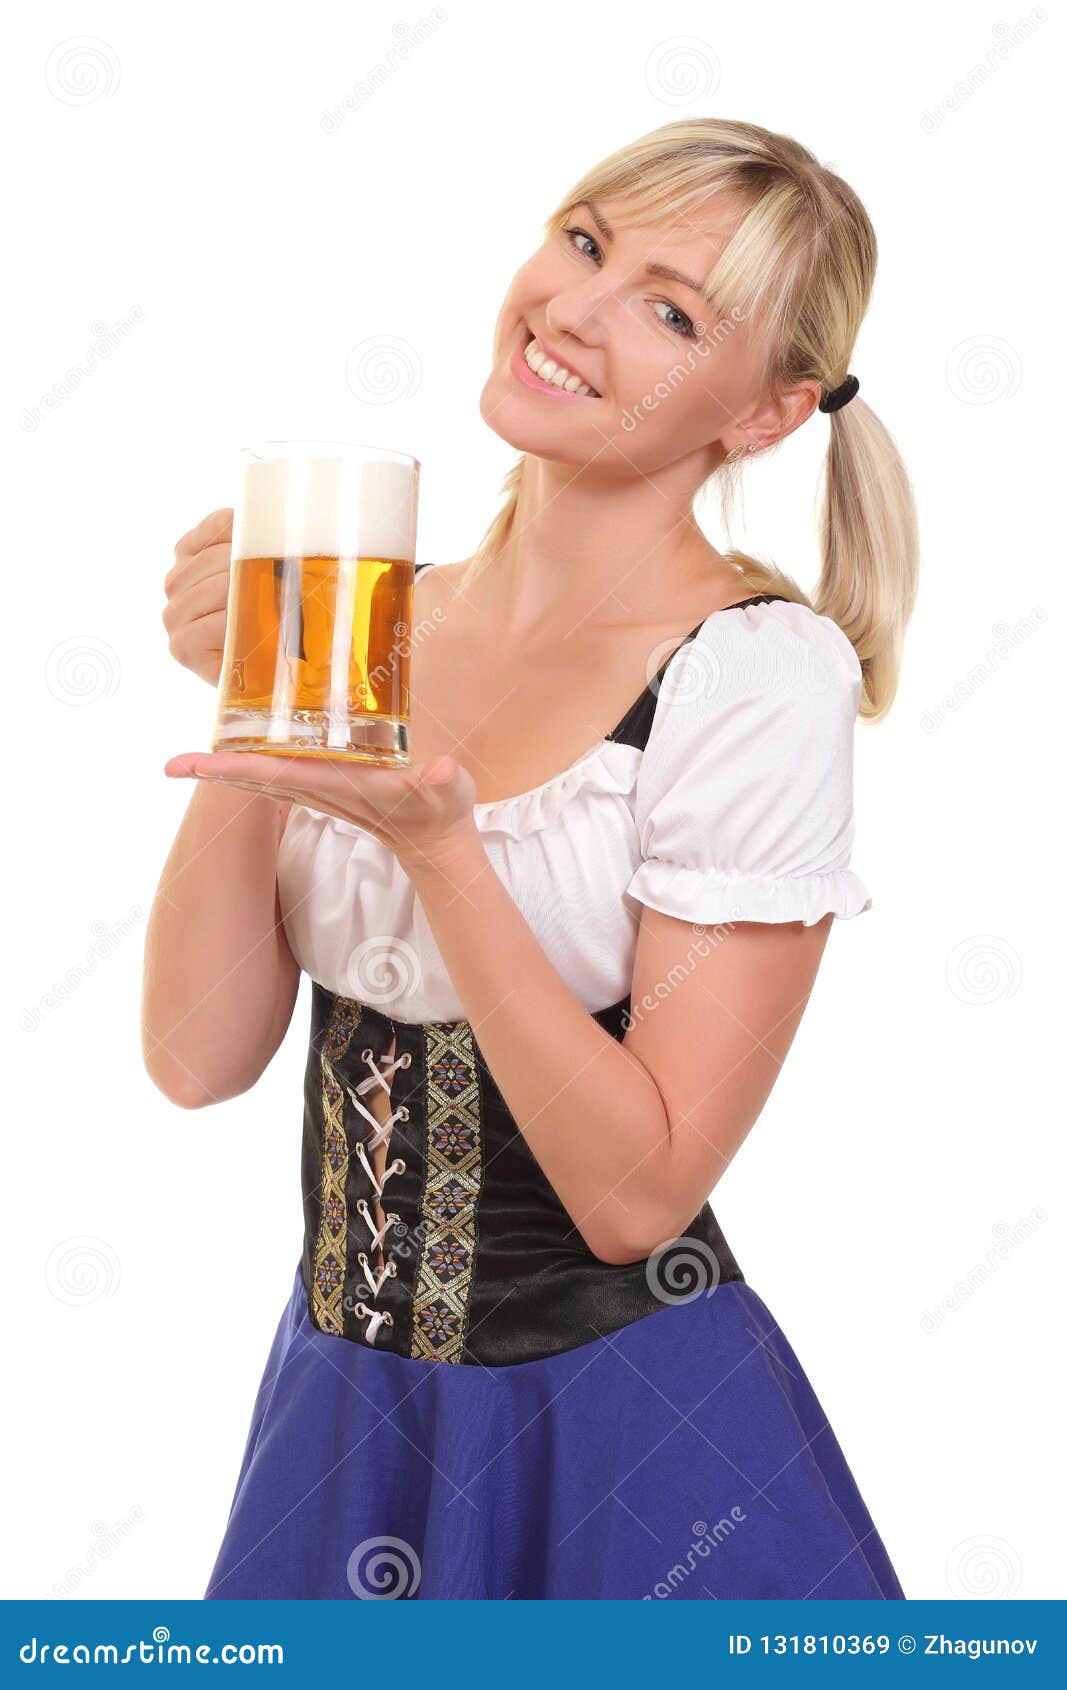 Young Attractive Woman Holding Beer Stock Image - Image of nice ...